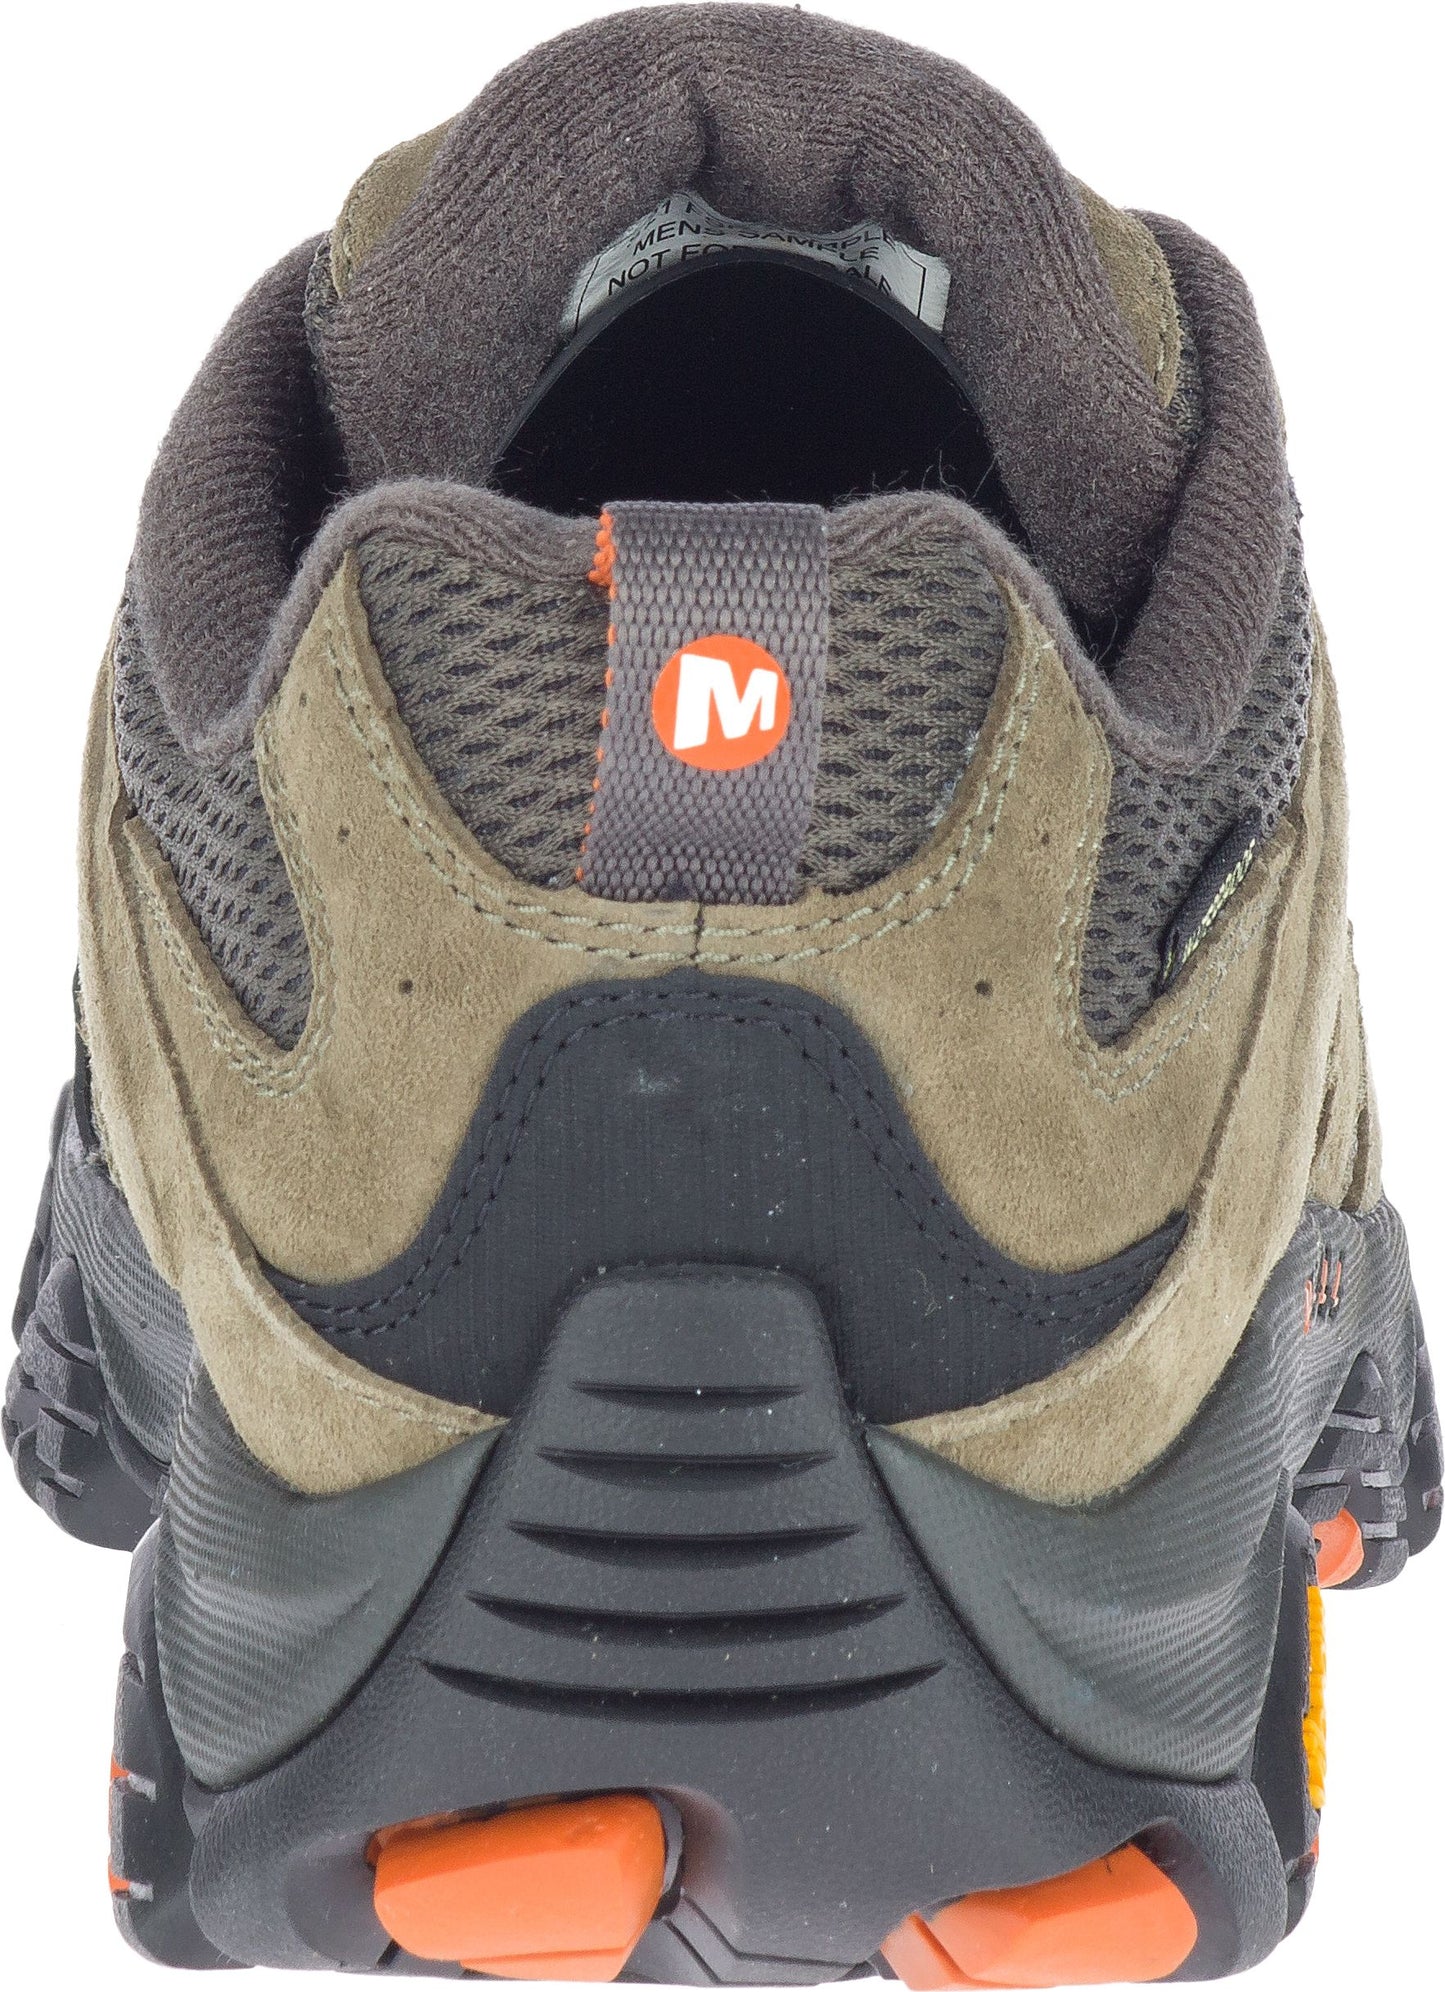 Merrell Shoes Moab 3 Waterproof Olive